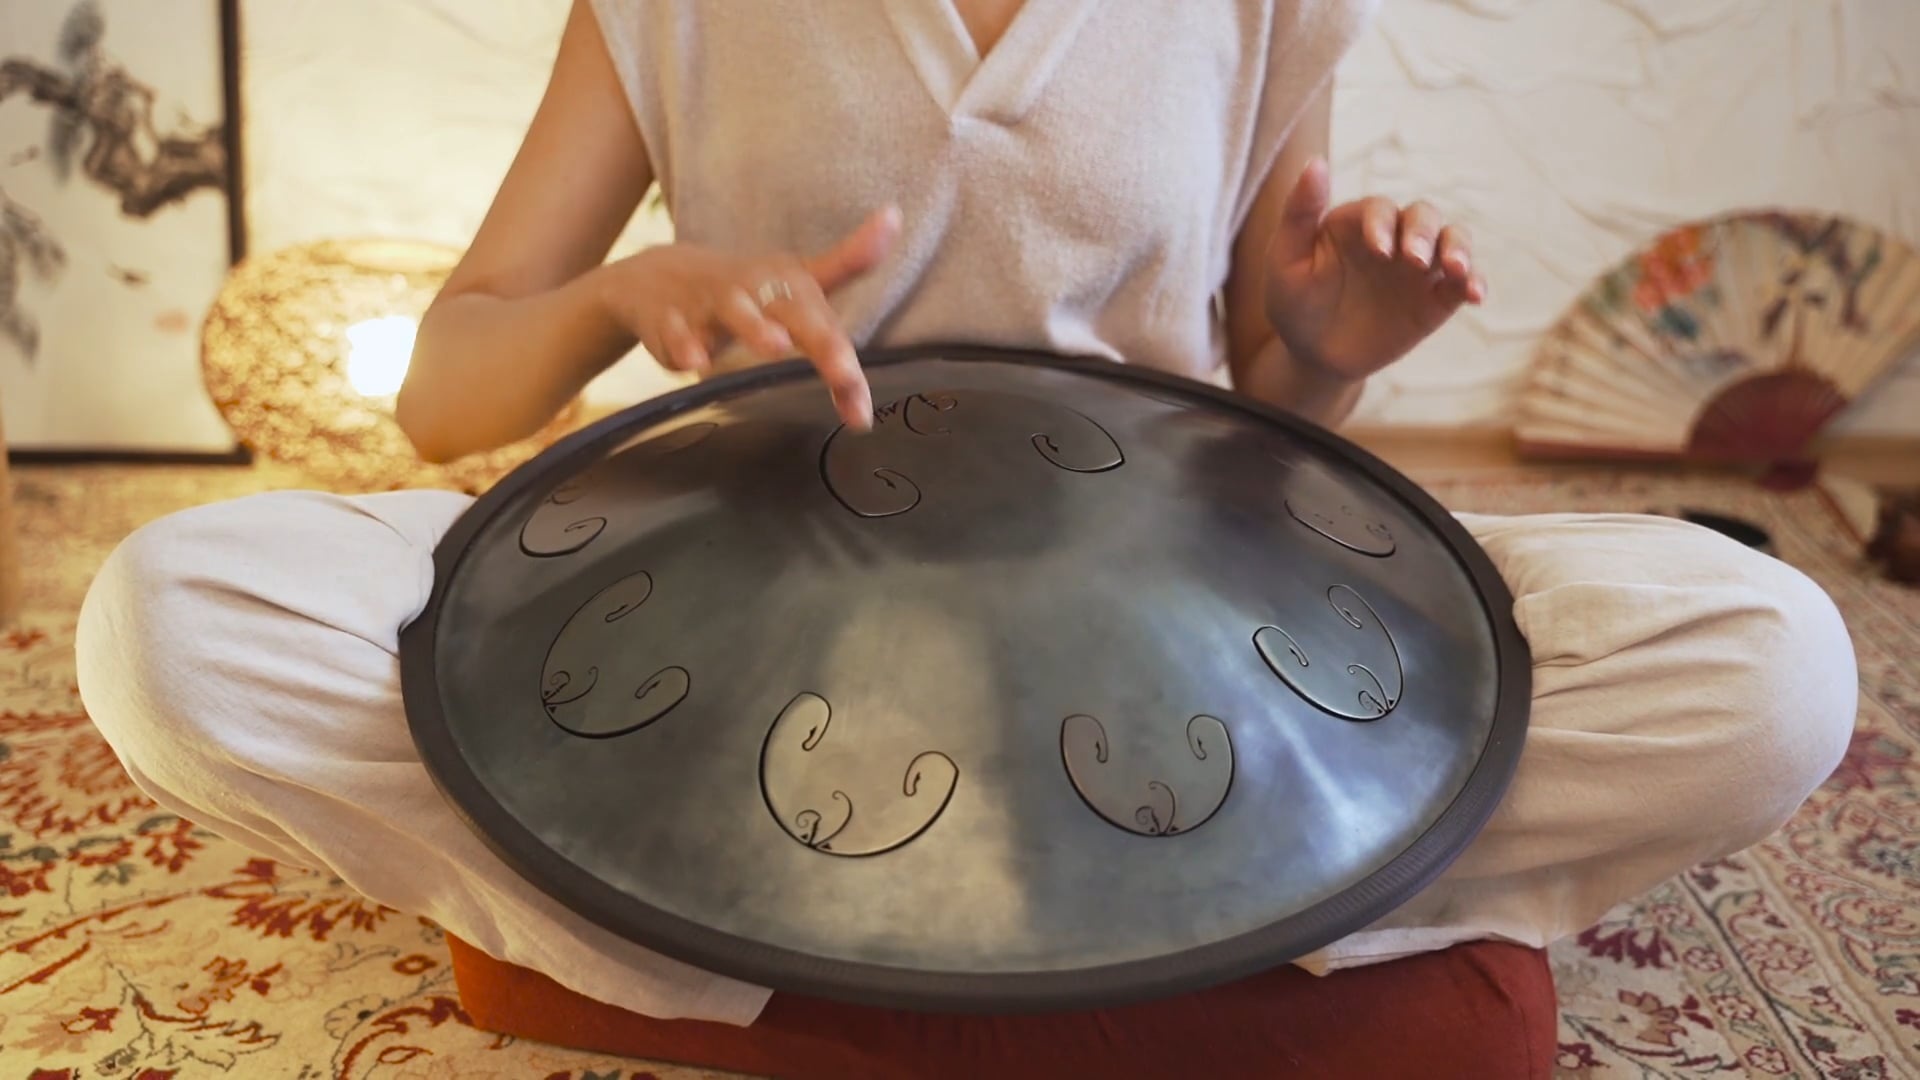 Hang (Instrument): Playing hang drum, The handpan playing activity incorporated into meditation and yoga. 1920x1080 Full HD Background.